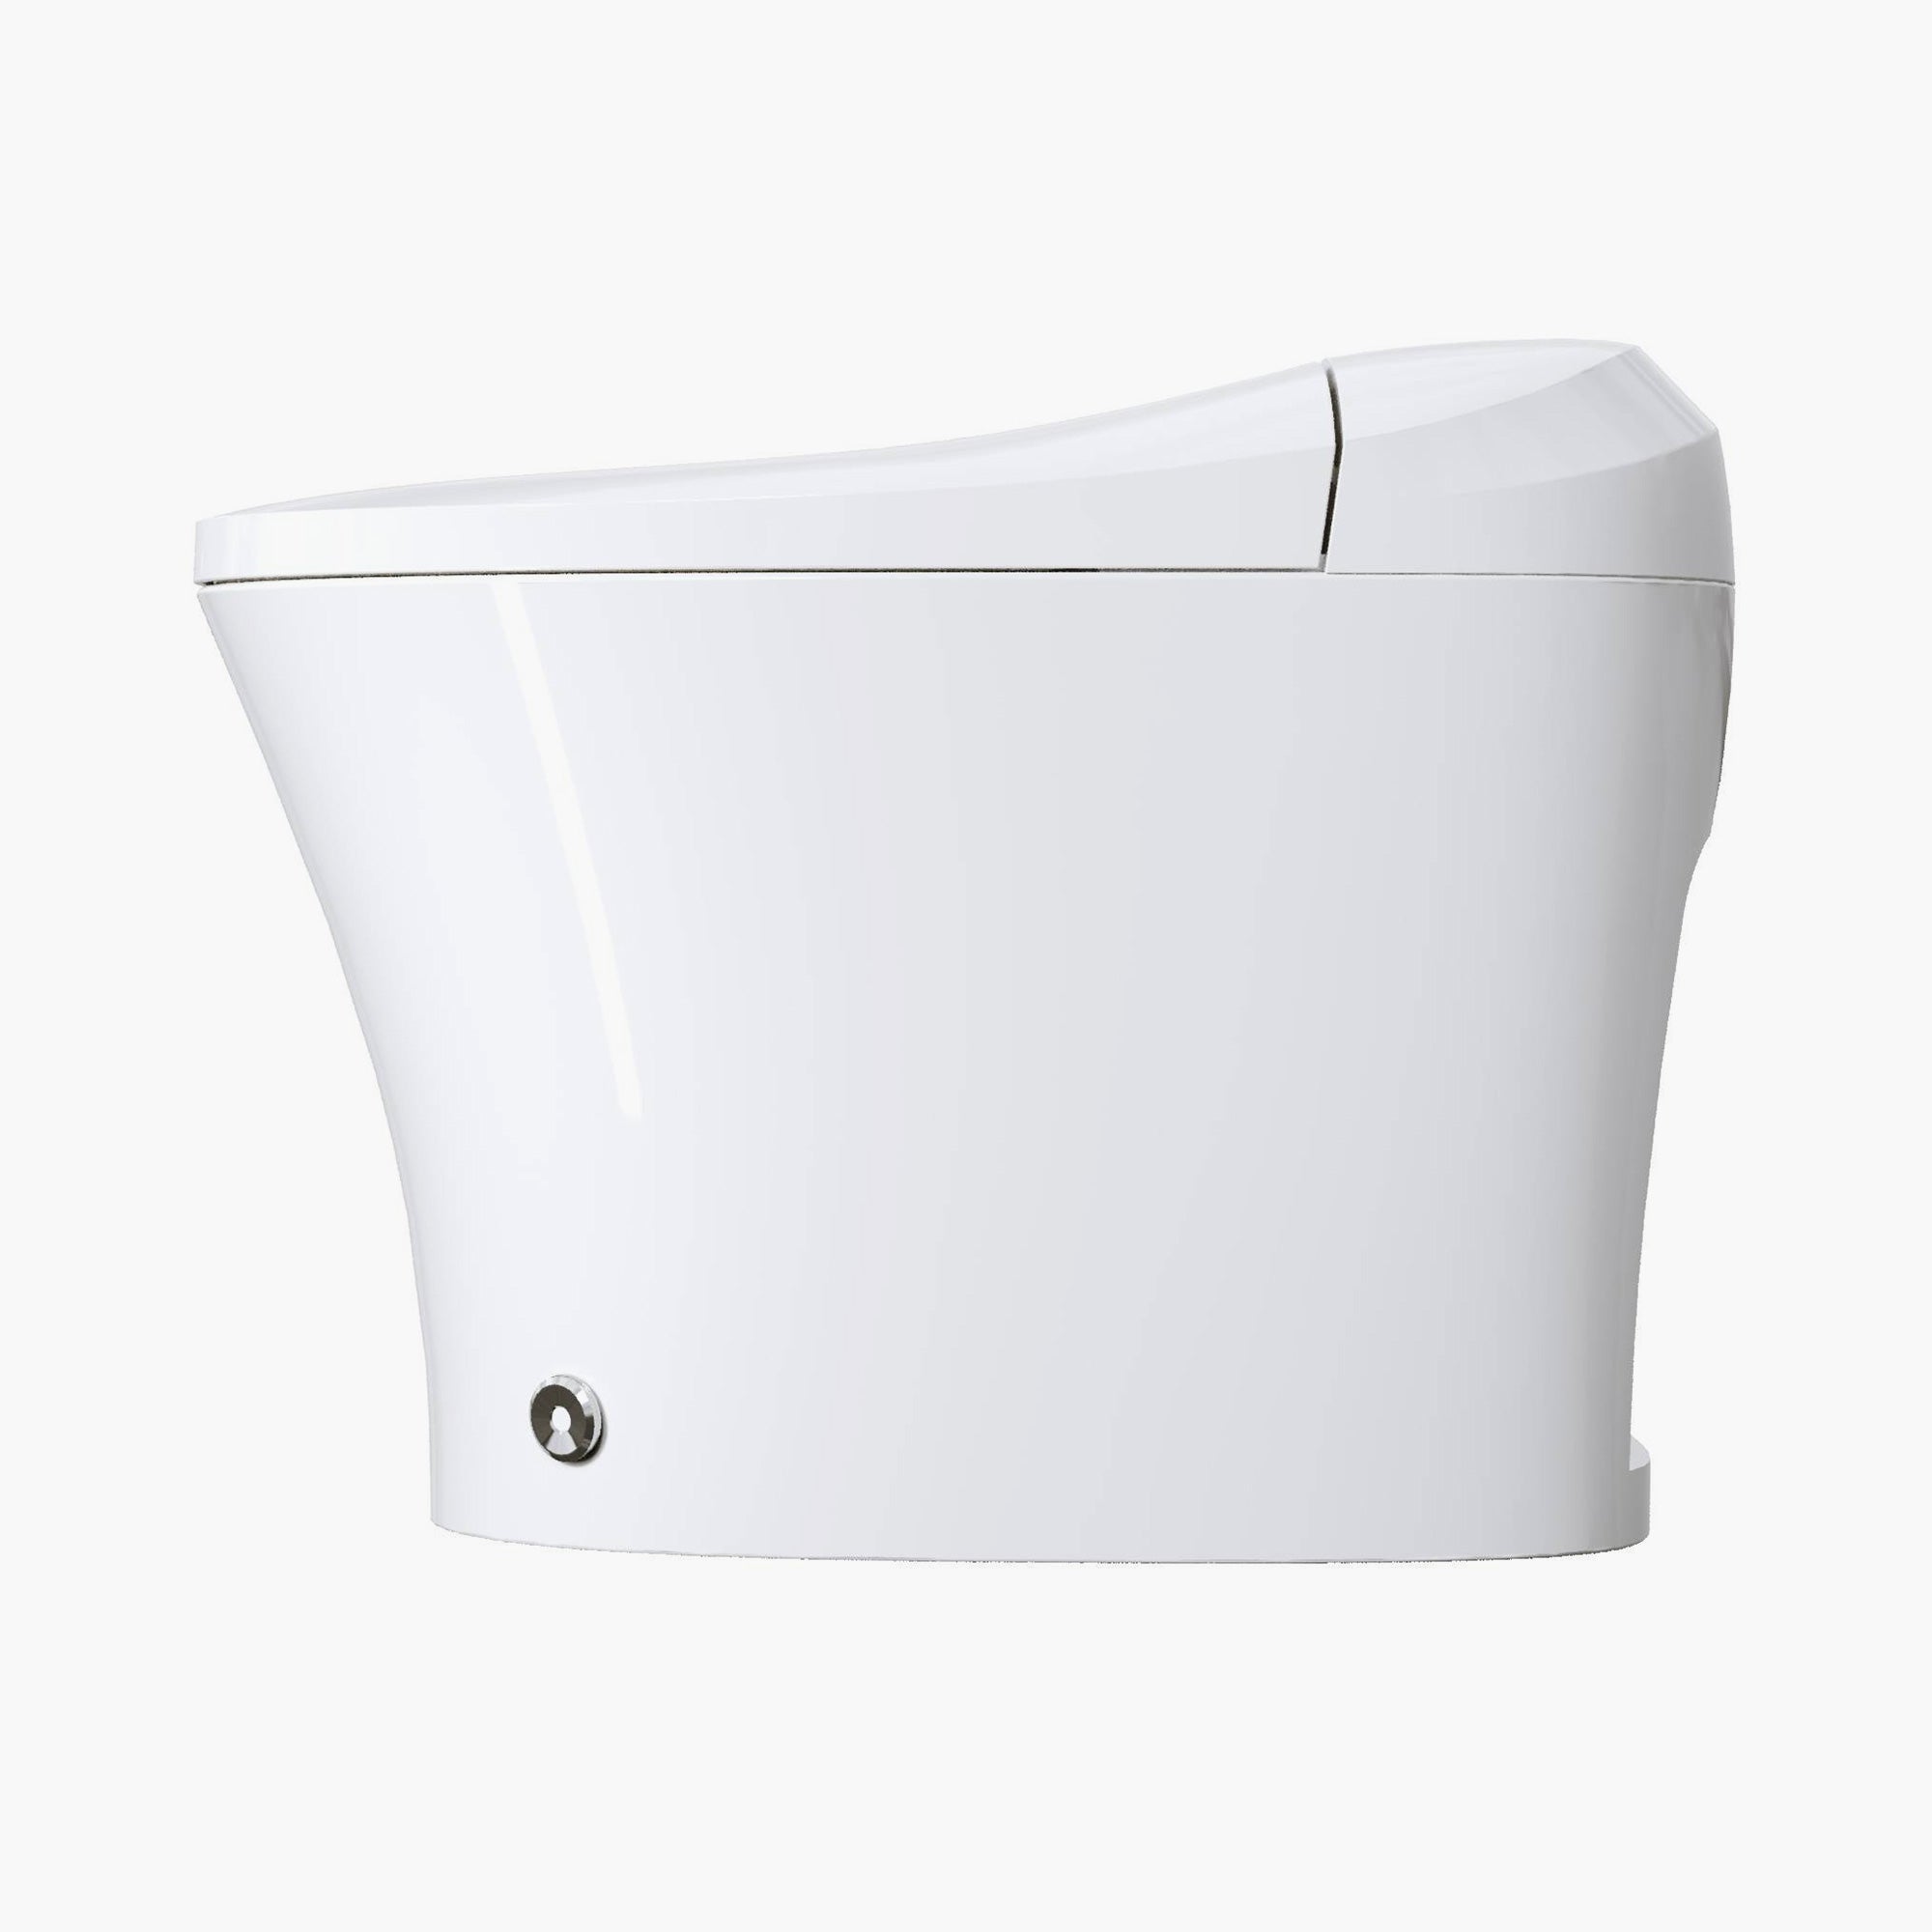 HOROW Best Toilet With Built In Bidet Compact Elongated Toilet Model T15